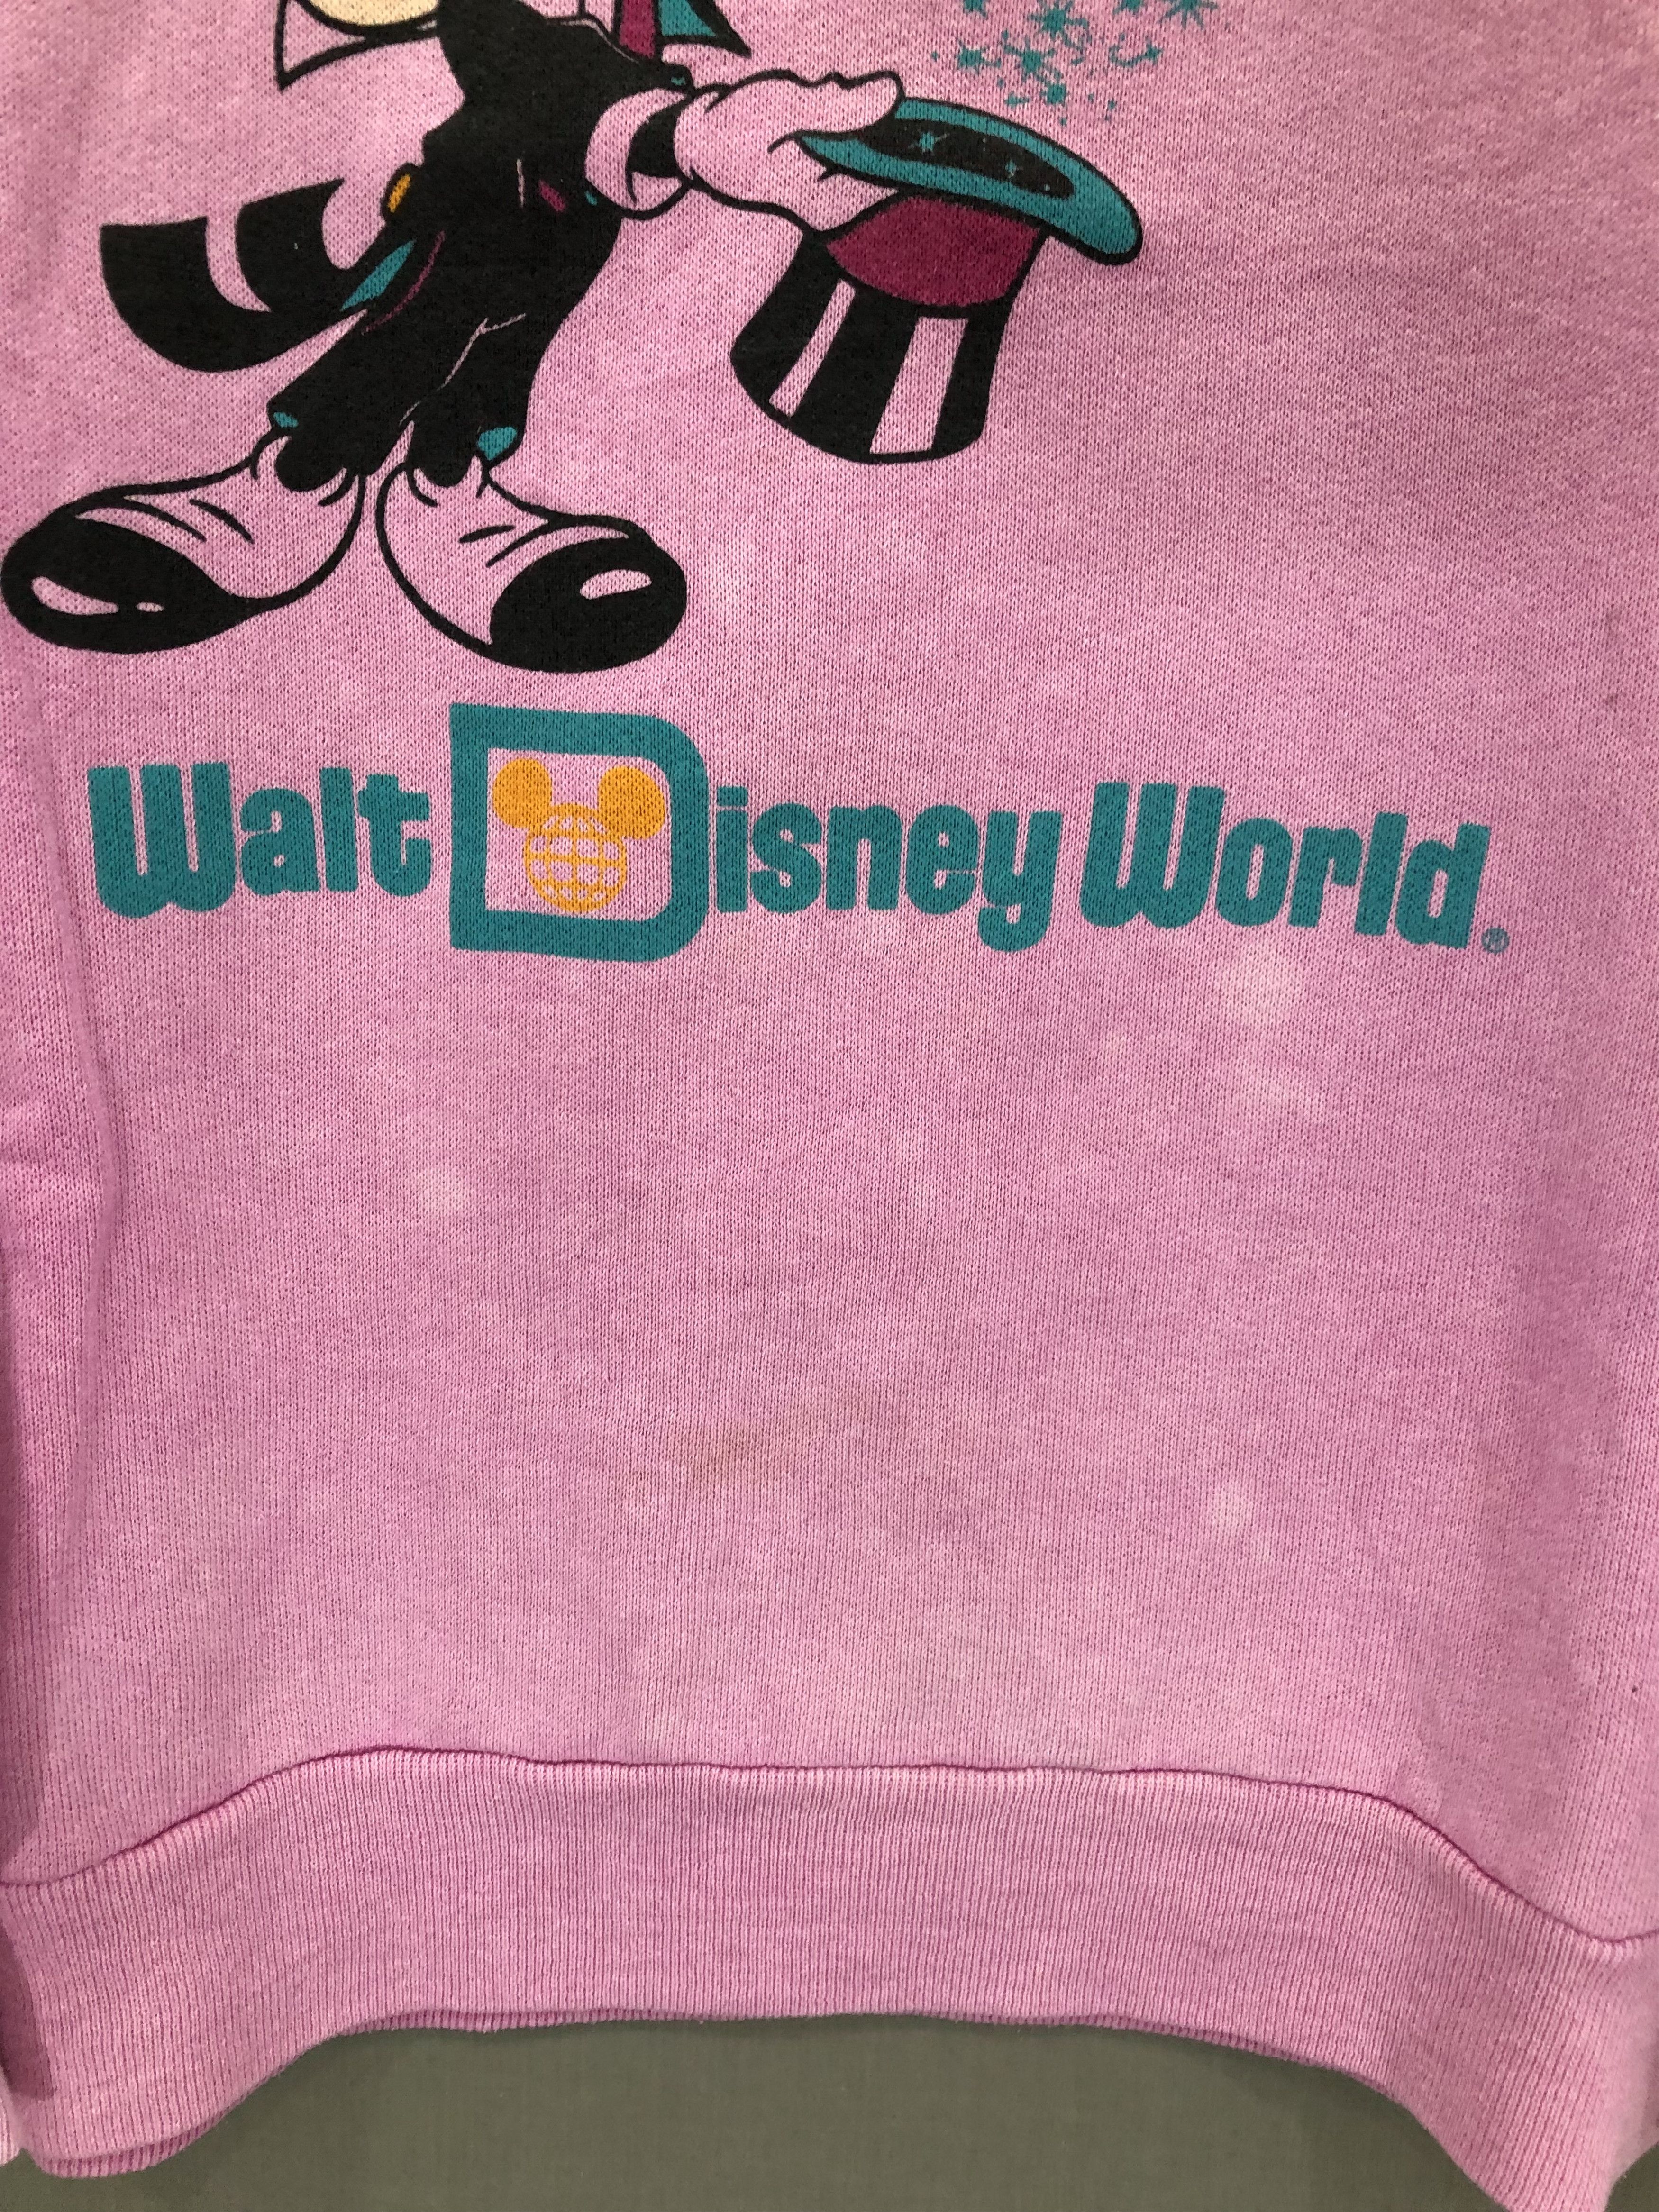 Mickey Mouse Vintage Pink Mickey Mouse Sweatshirt XS #5600-1-212-IRA Size US XS / EU 42 / 0 - 2 Preview